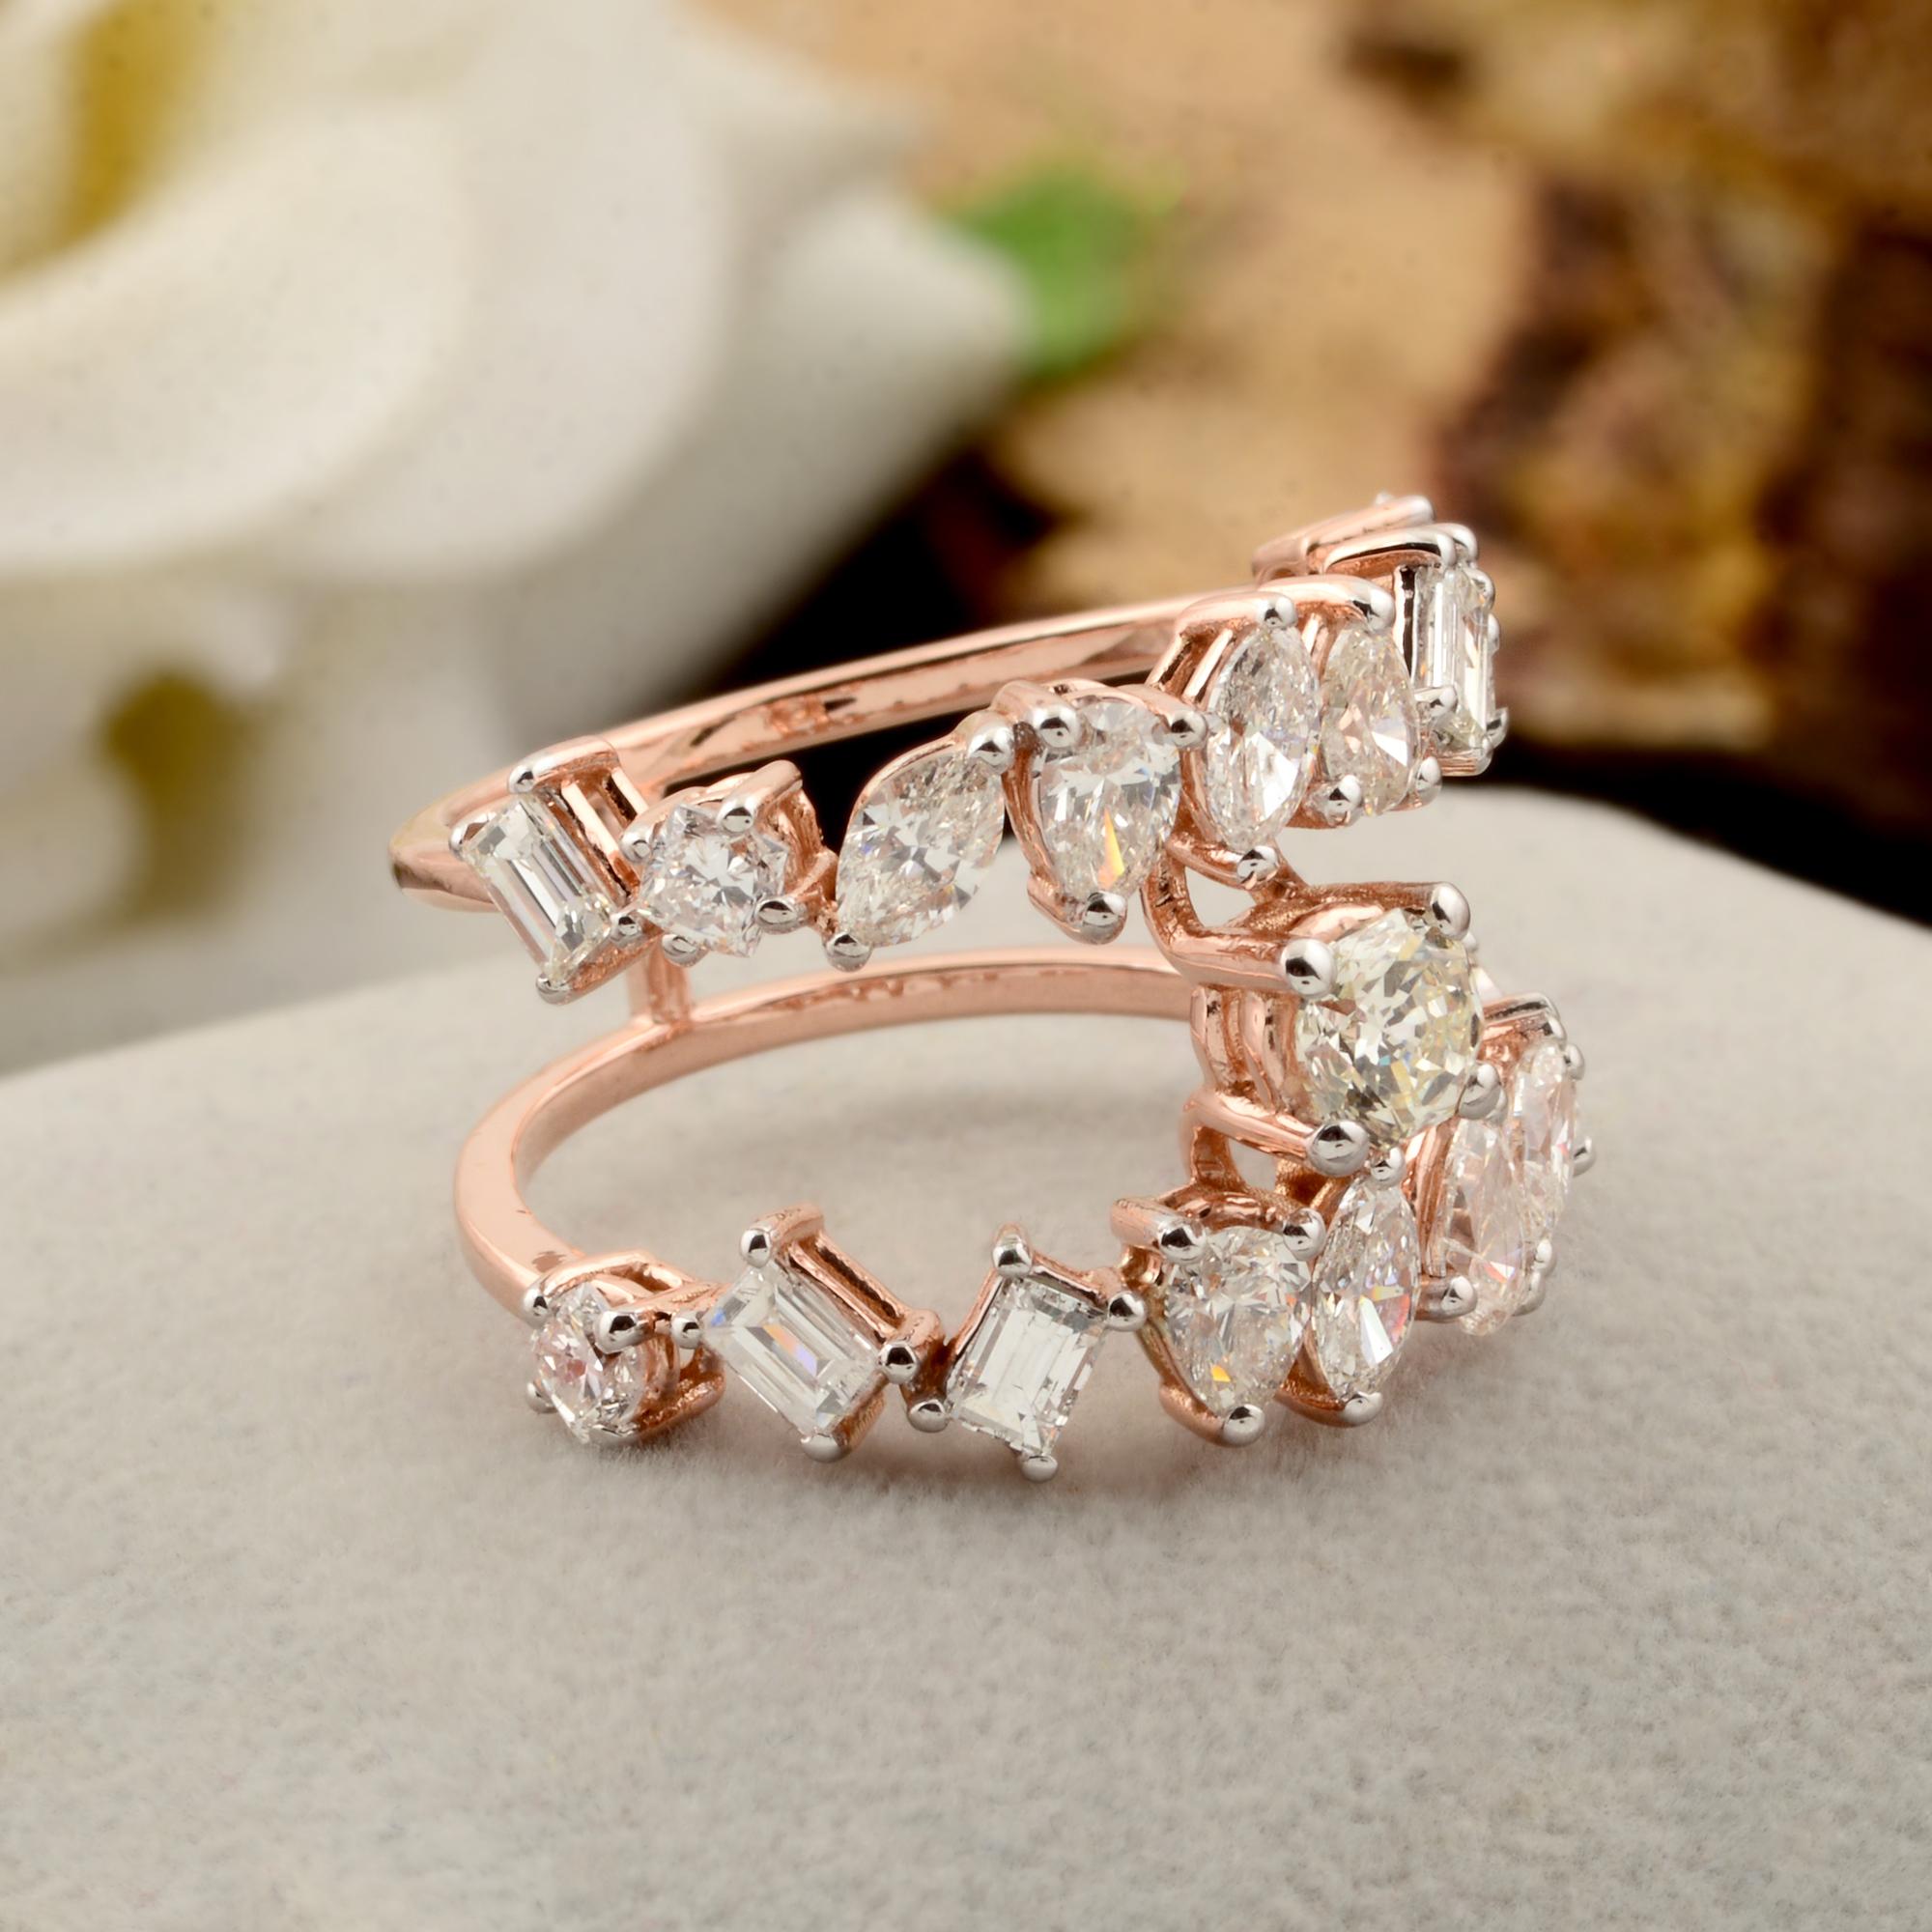 For Sale:  2.35 Carat SI Clarity HI Color Diamond Designer Ring Solid 18k Rose Gold Jewelry 5